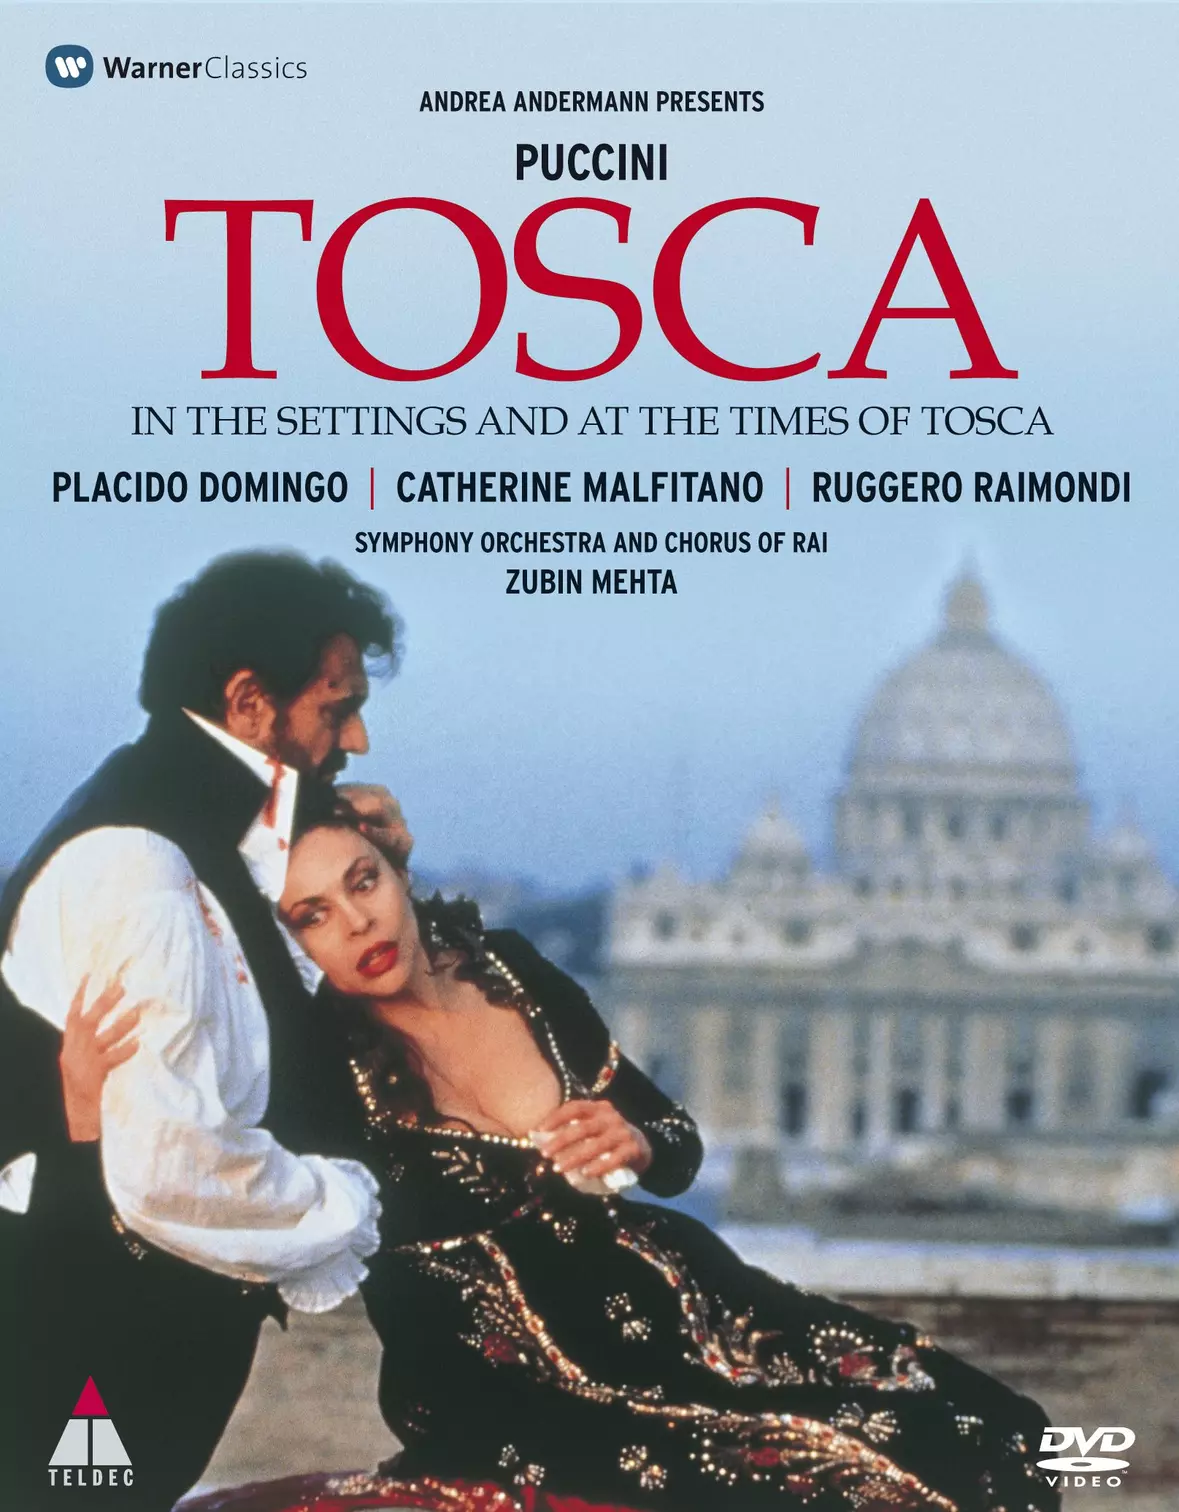 Puccini: Tosca - In the settings and at the times of Tosca